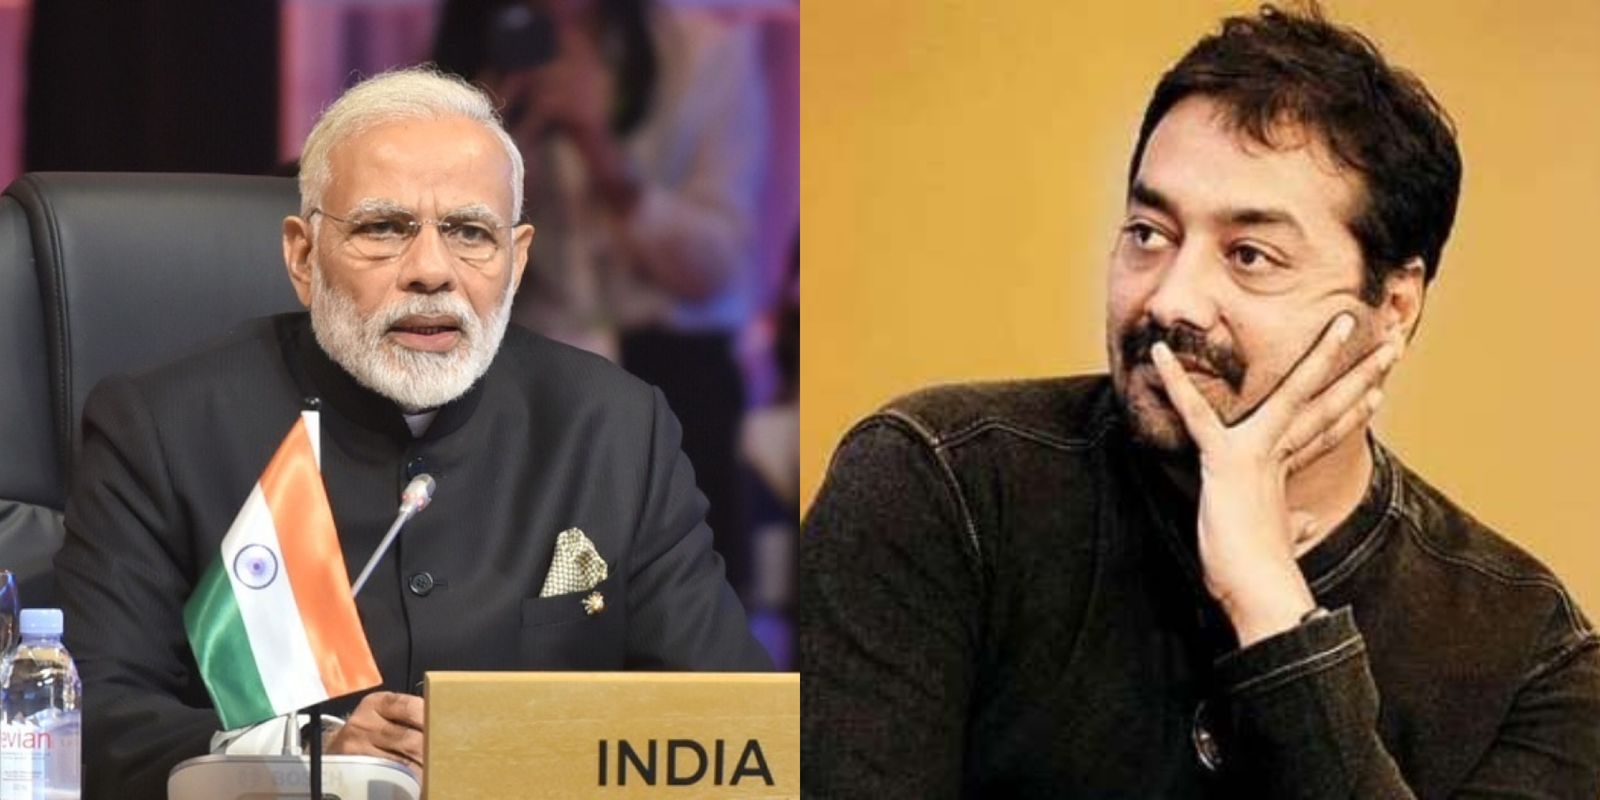 COVID-19: Anurag Kashyap Has An Interesting Reaction To PM Modi’s 21-Day Long National Lockdown Announcement